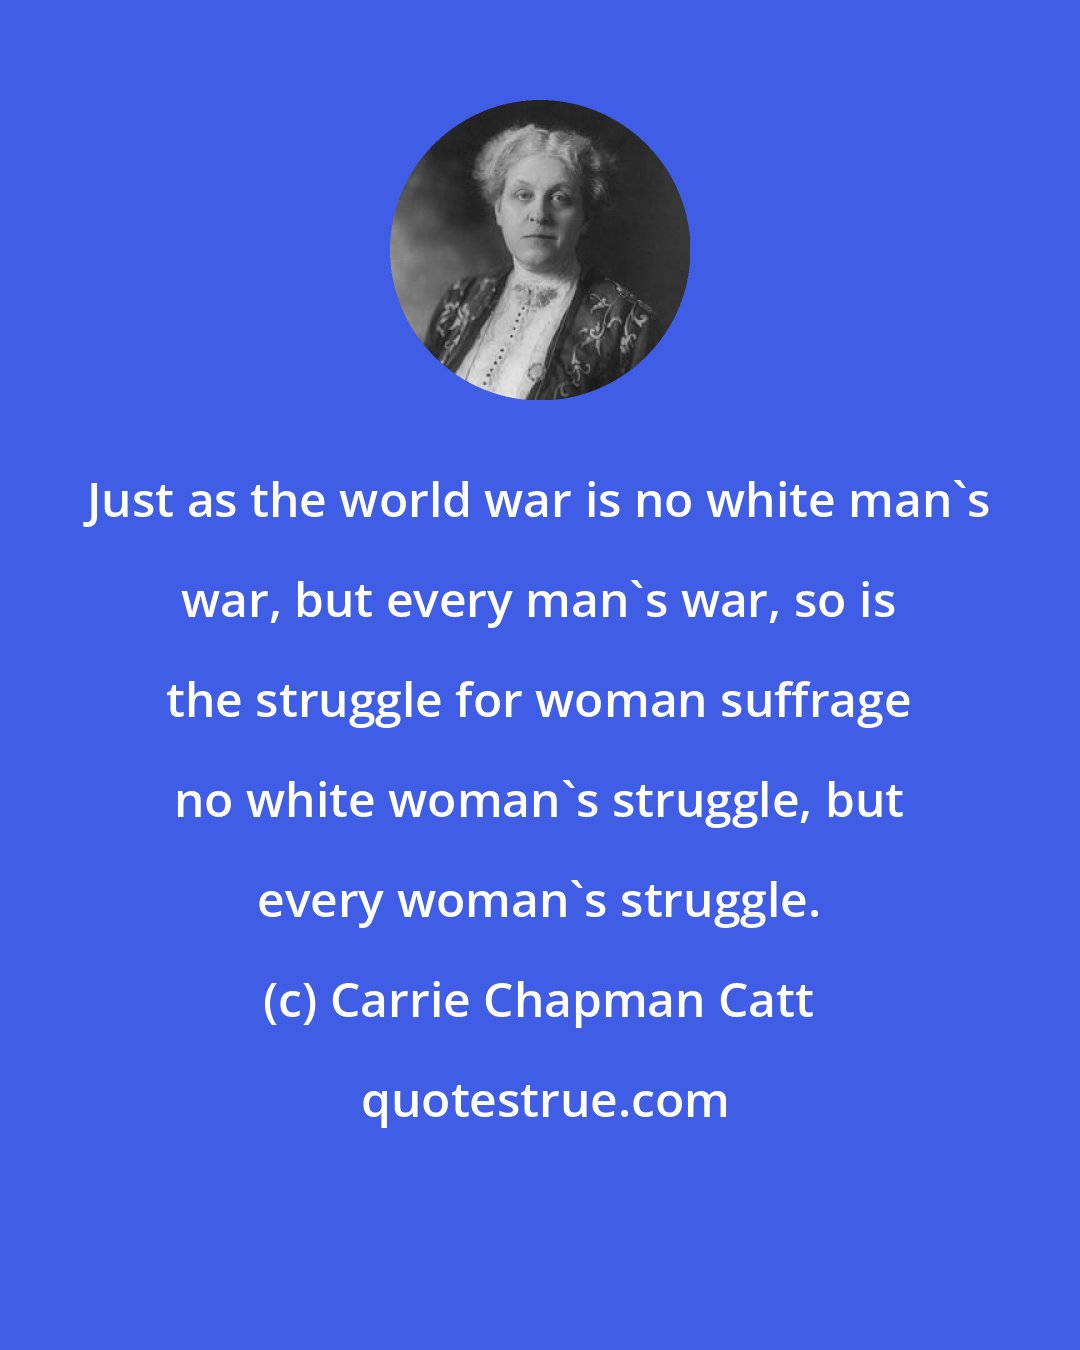 Carrie Chapman Catt: Just as the world war is no white man's war, but every man's war, so is the struggle for woman suffrage no white woman's struggle, but every woman's struggle.